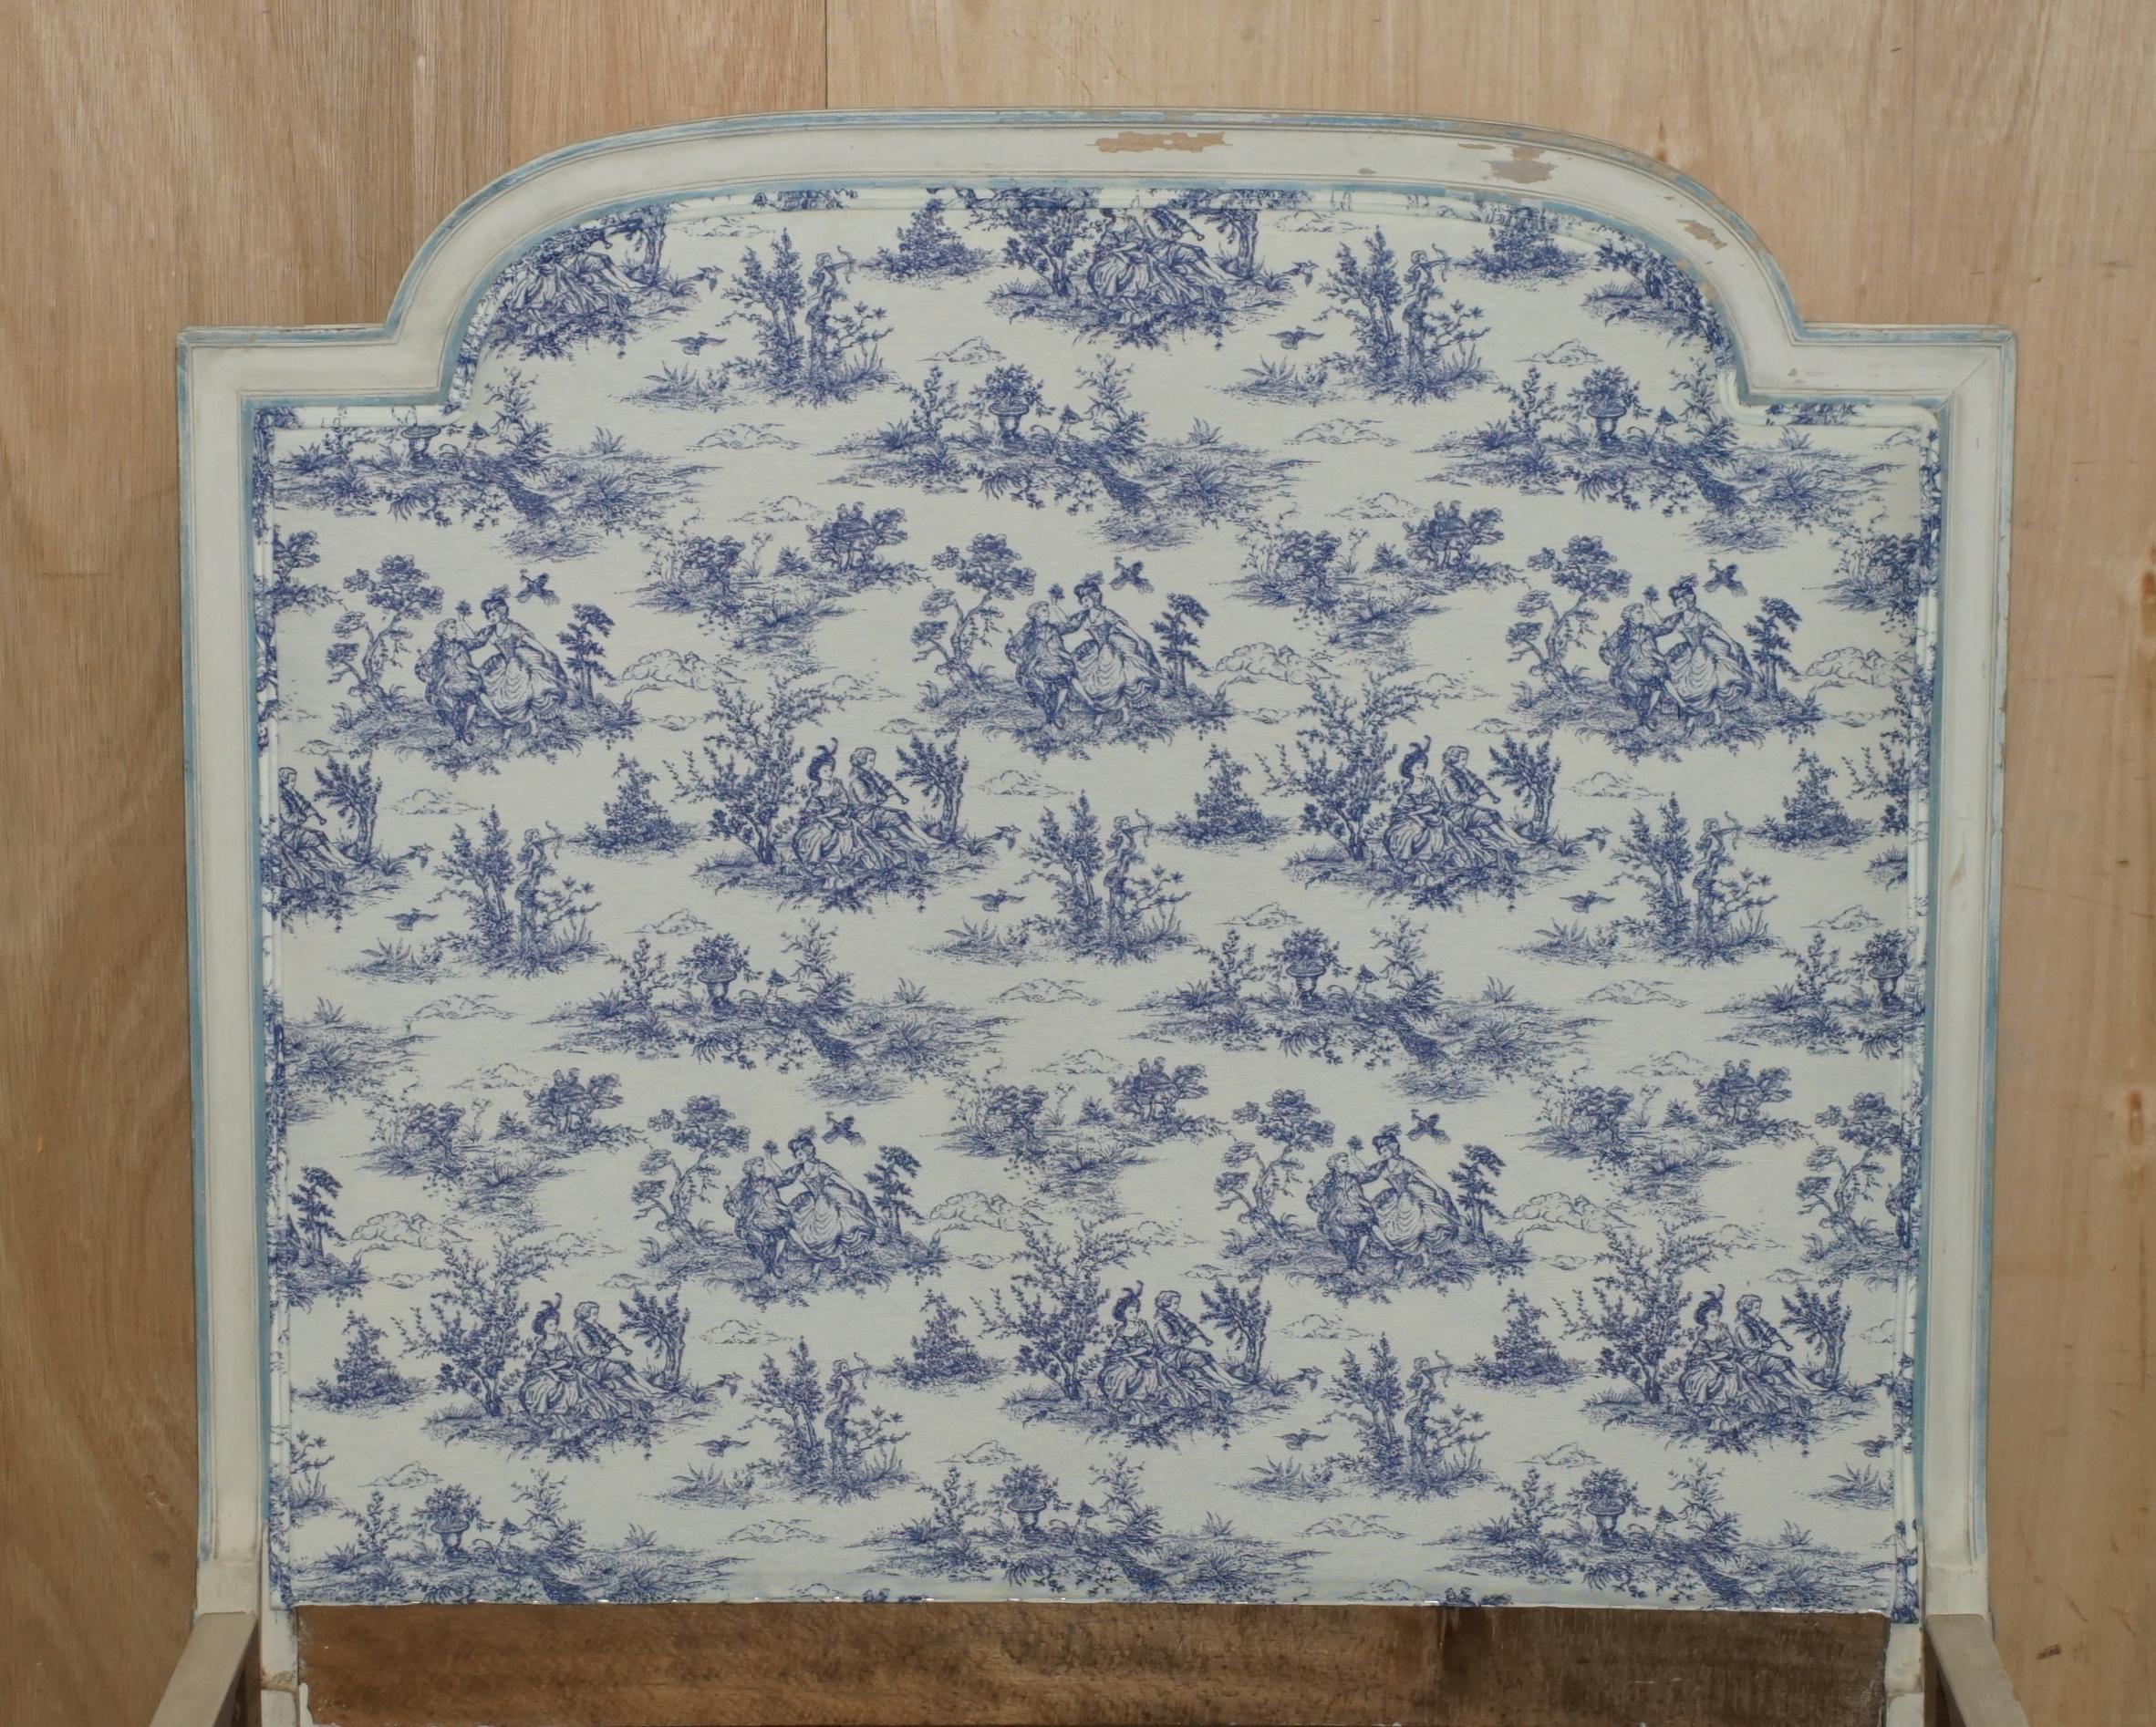 PAIR OF ANTIQUE FRENCH SiNGLE BEDSTEAD FRAMES WITH TOILE DE JOUY UPHOLSTERY For Sale 8